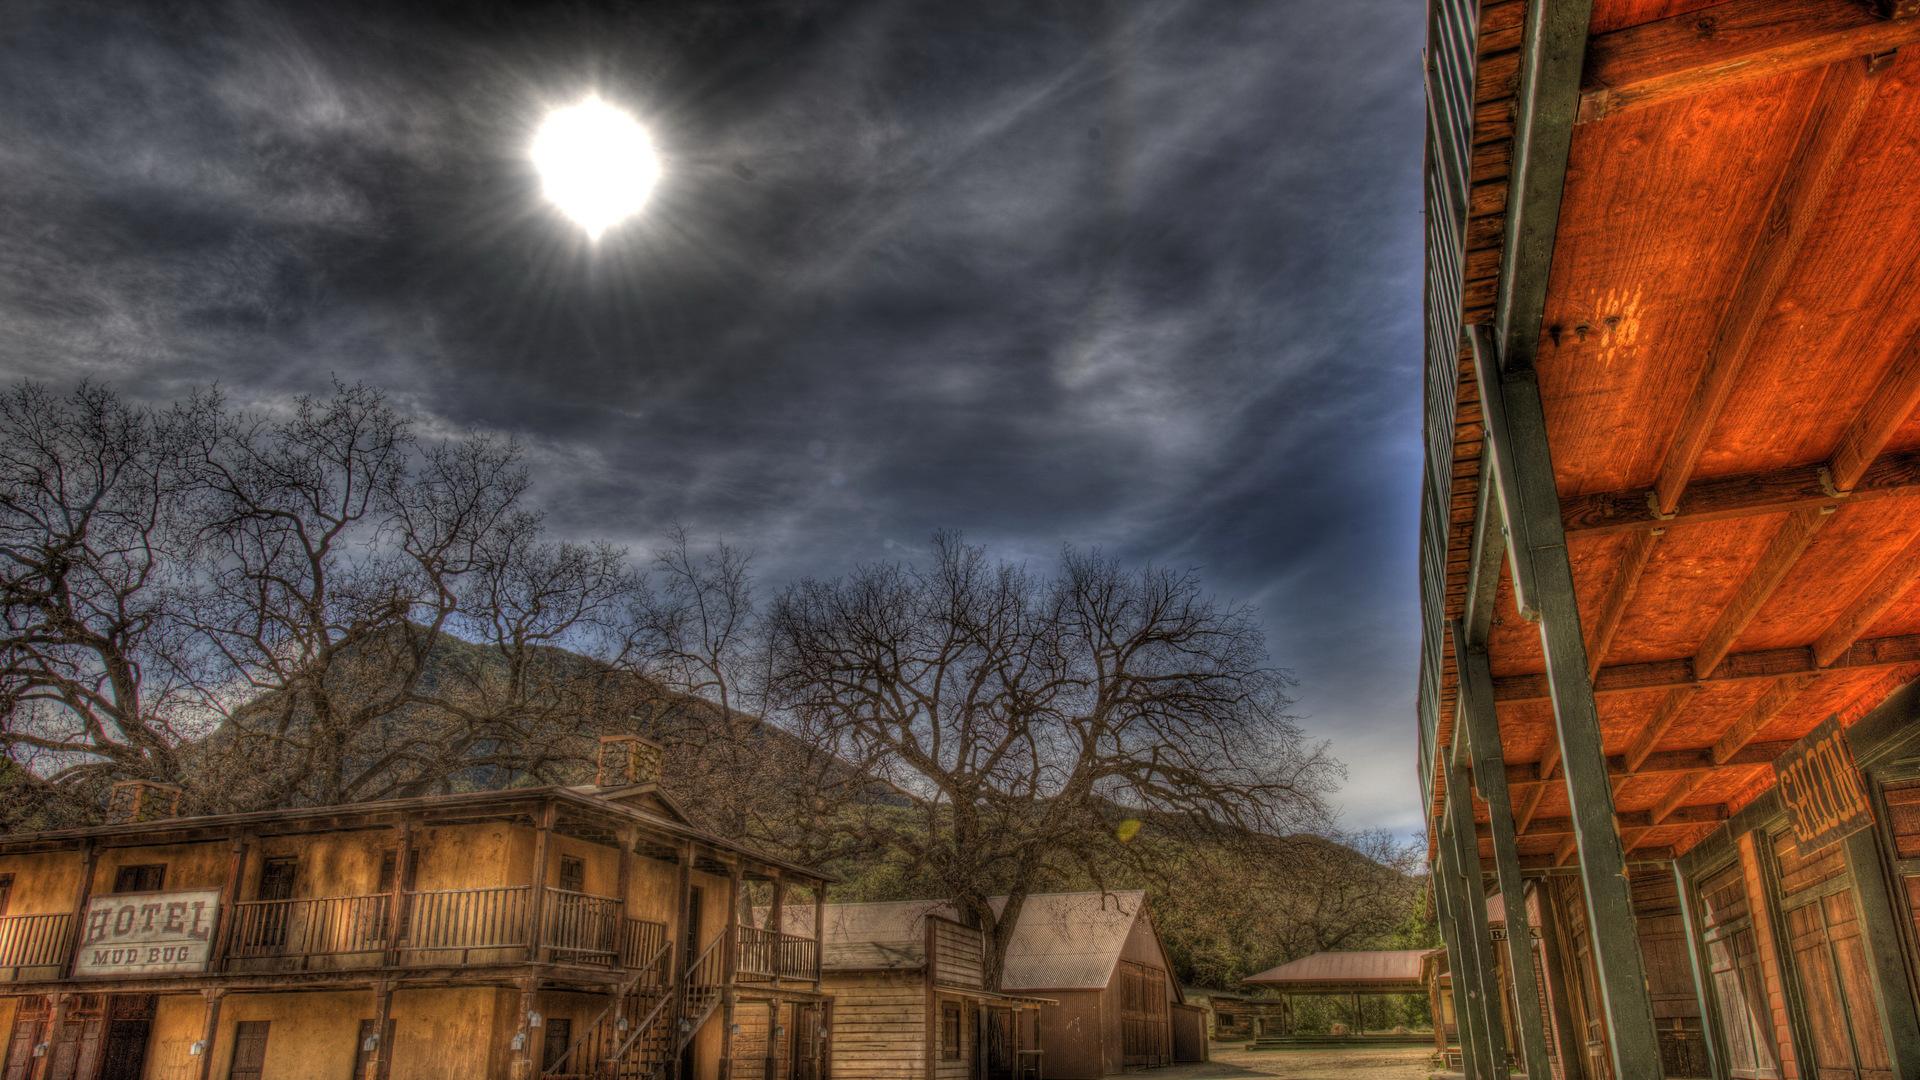 Old west town in midday hdr - High Quality and other